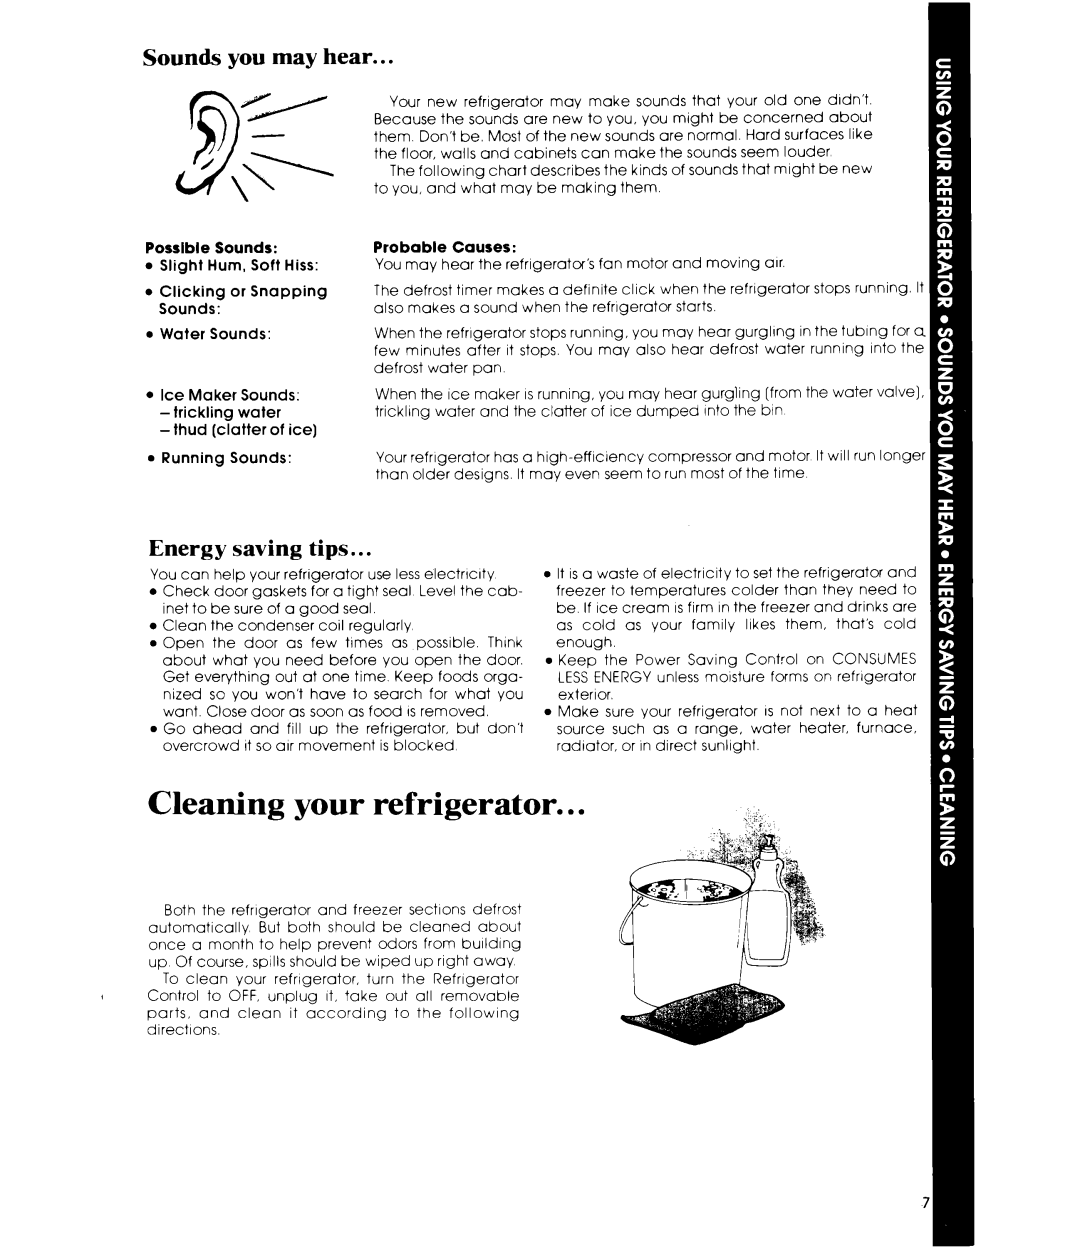 Whirlpool ETIGJM manual Cleaning your refrigerator, Sounds you may hear, Energy saving tips, ’ ,6 